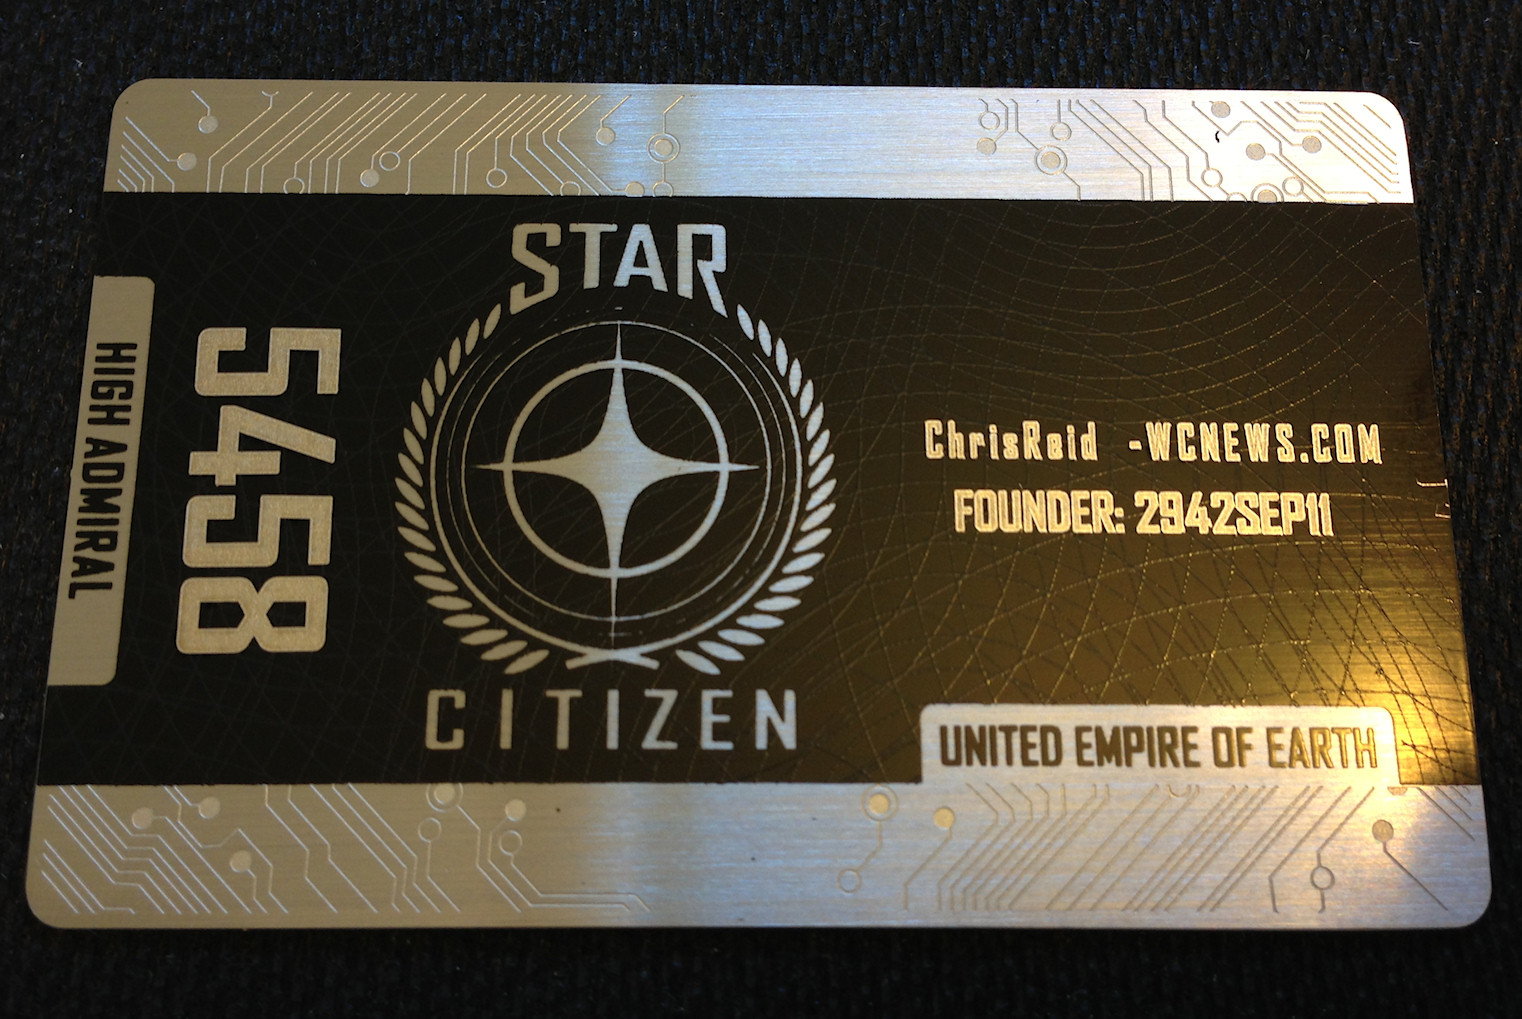 Star Citizen Cards Finally Arrive (July 22, 2013) | Wing Commander CIC